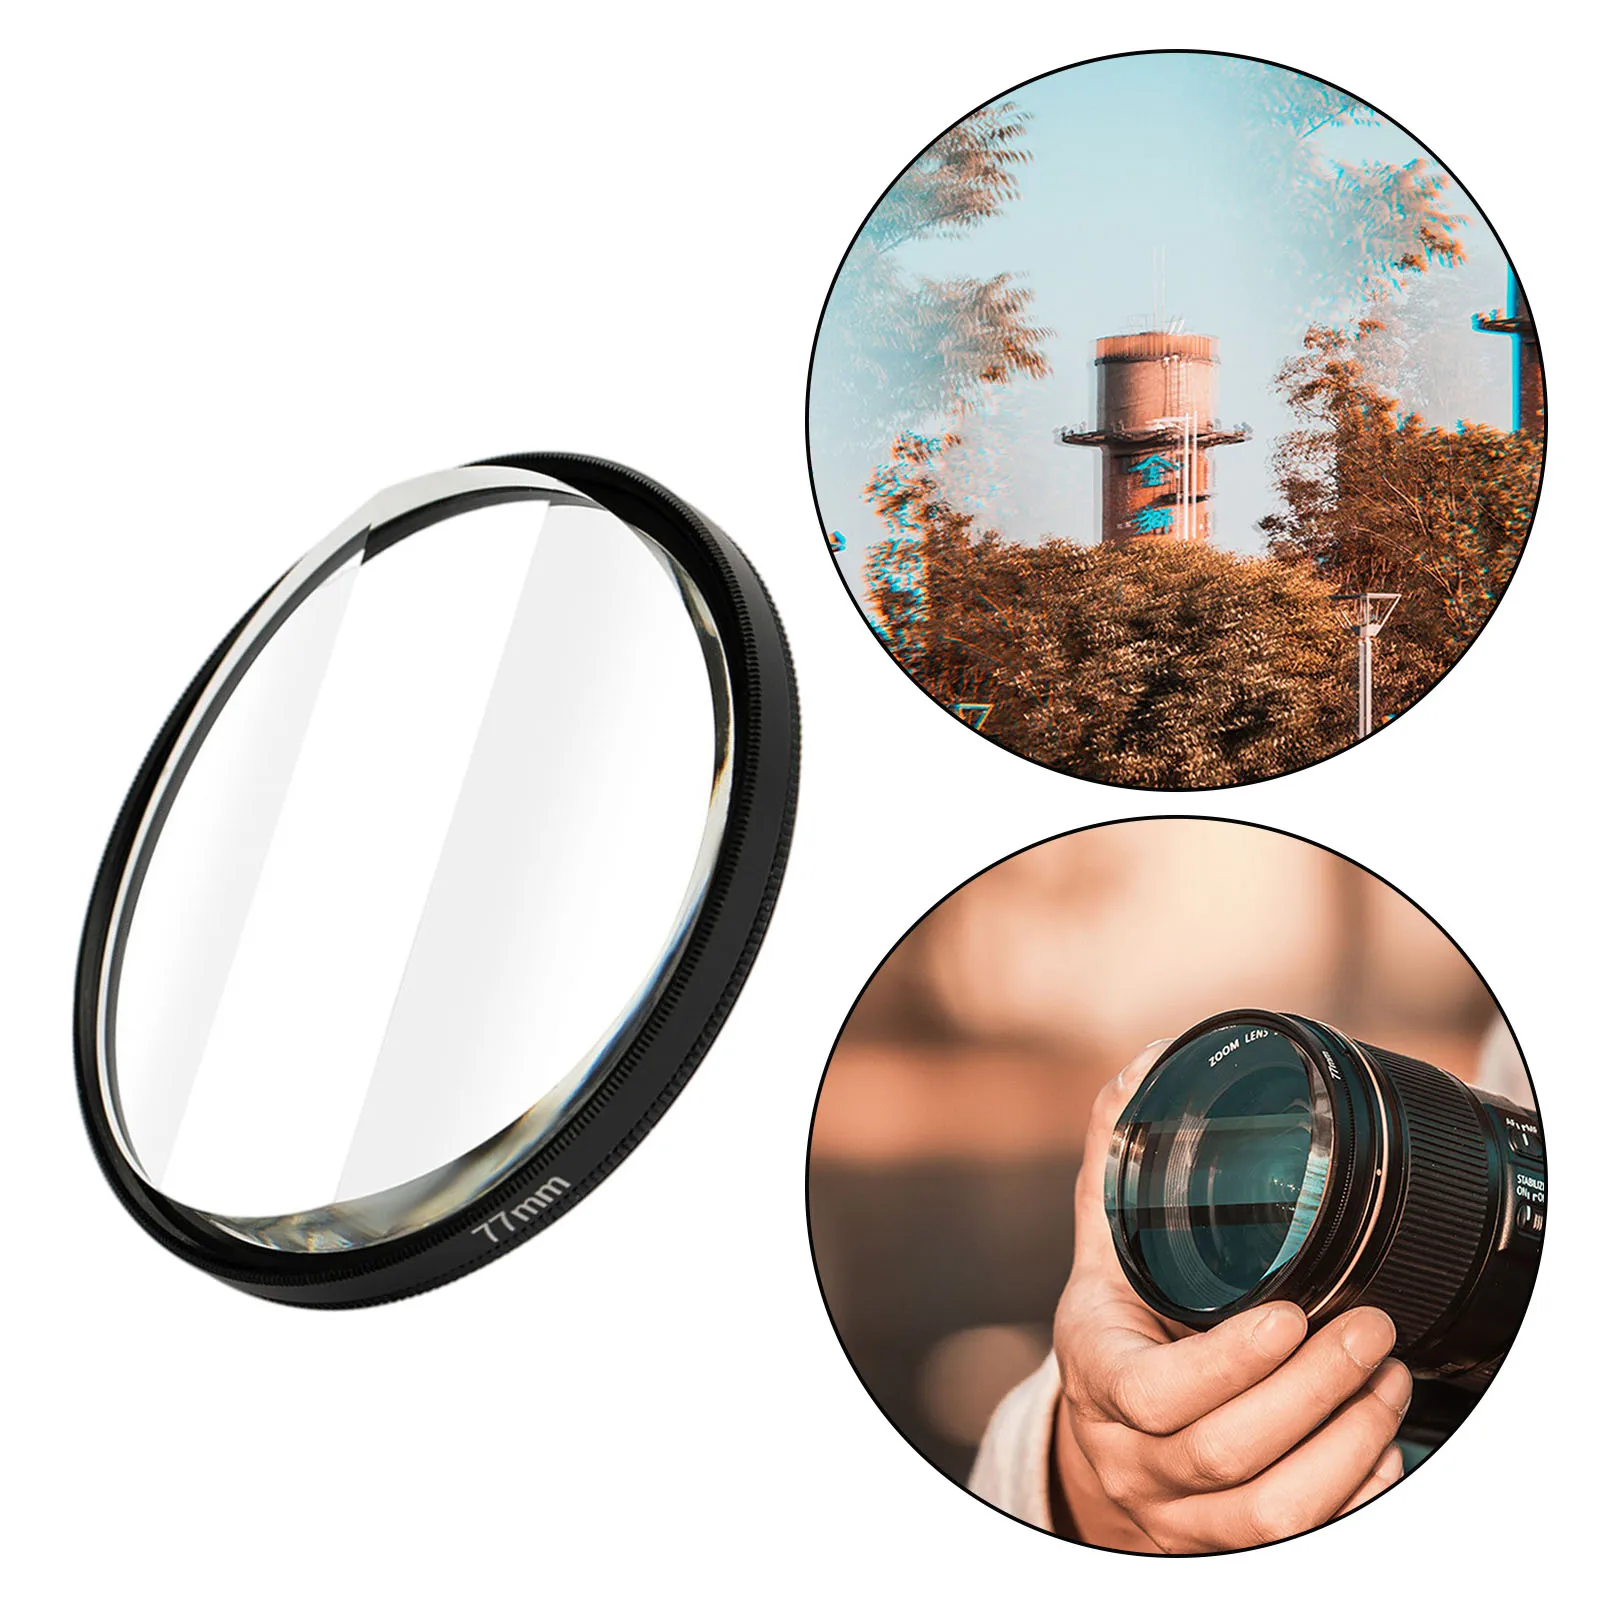 Photographic Camera Special Effects Filter 77mm Fractal Glass Filter Quad Prism SLR Camera Lens Accessories by BITINBI 